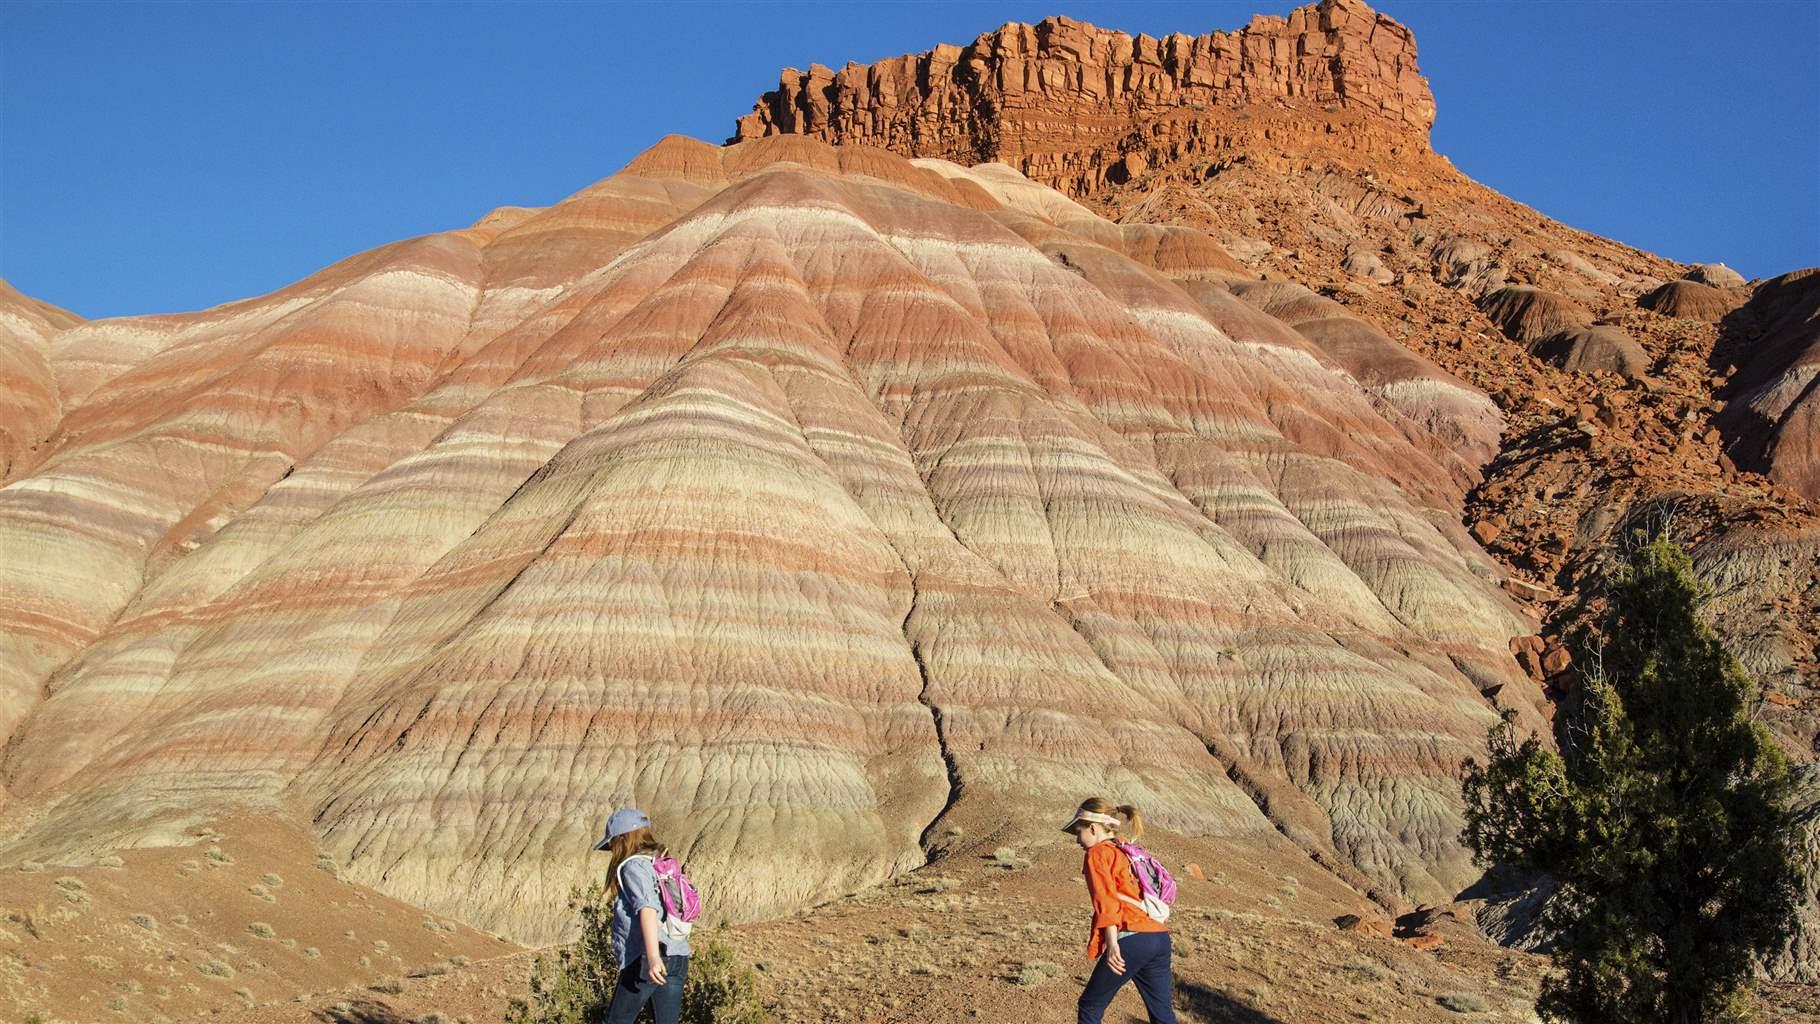 Two White women in comfortable hiking clothes walk on red earth past a large rock formation striated in the pastel browns, beiges, and reds of the U.S. desert Southwest. Beyond the formation, a burnt-orange mesa rises against a deep blue sky. Some native grasses and shrubs are present.